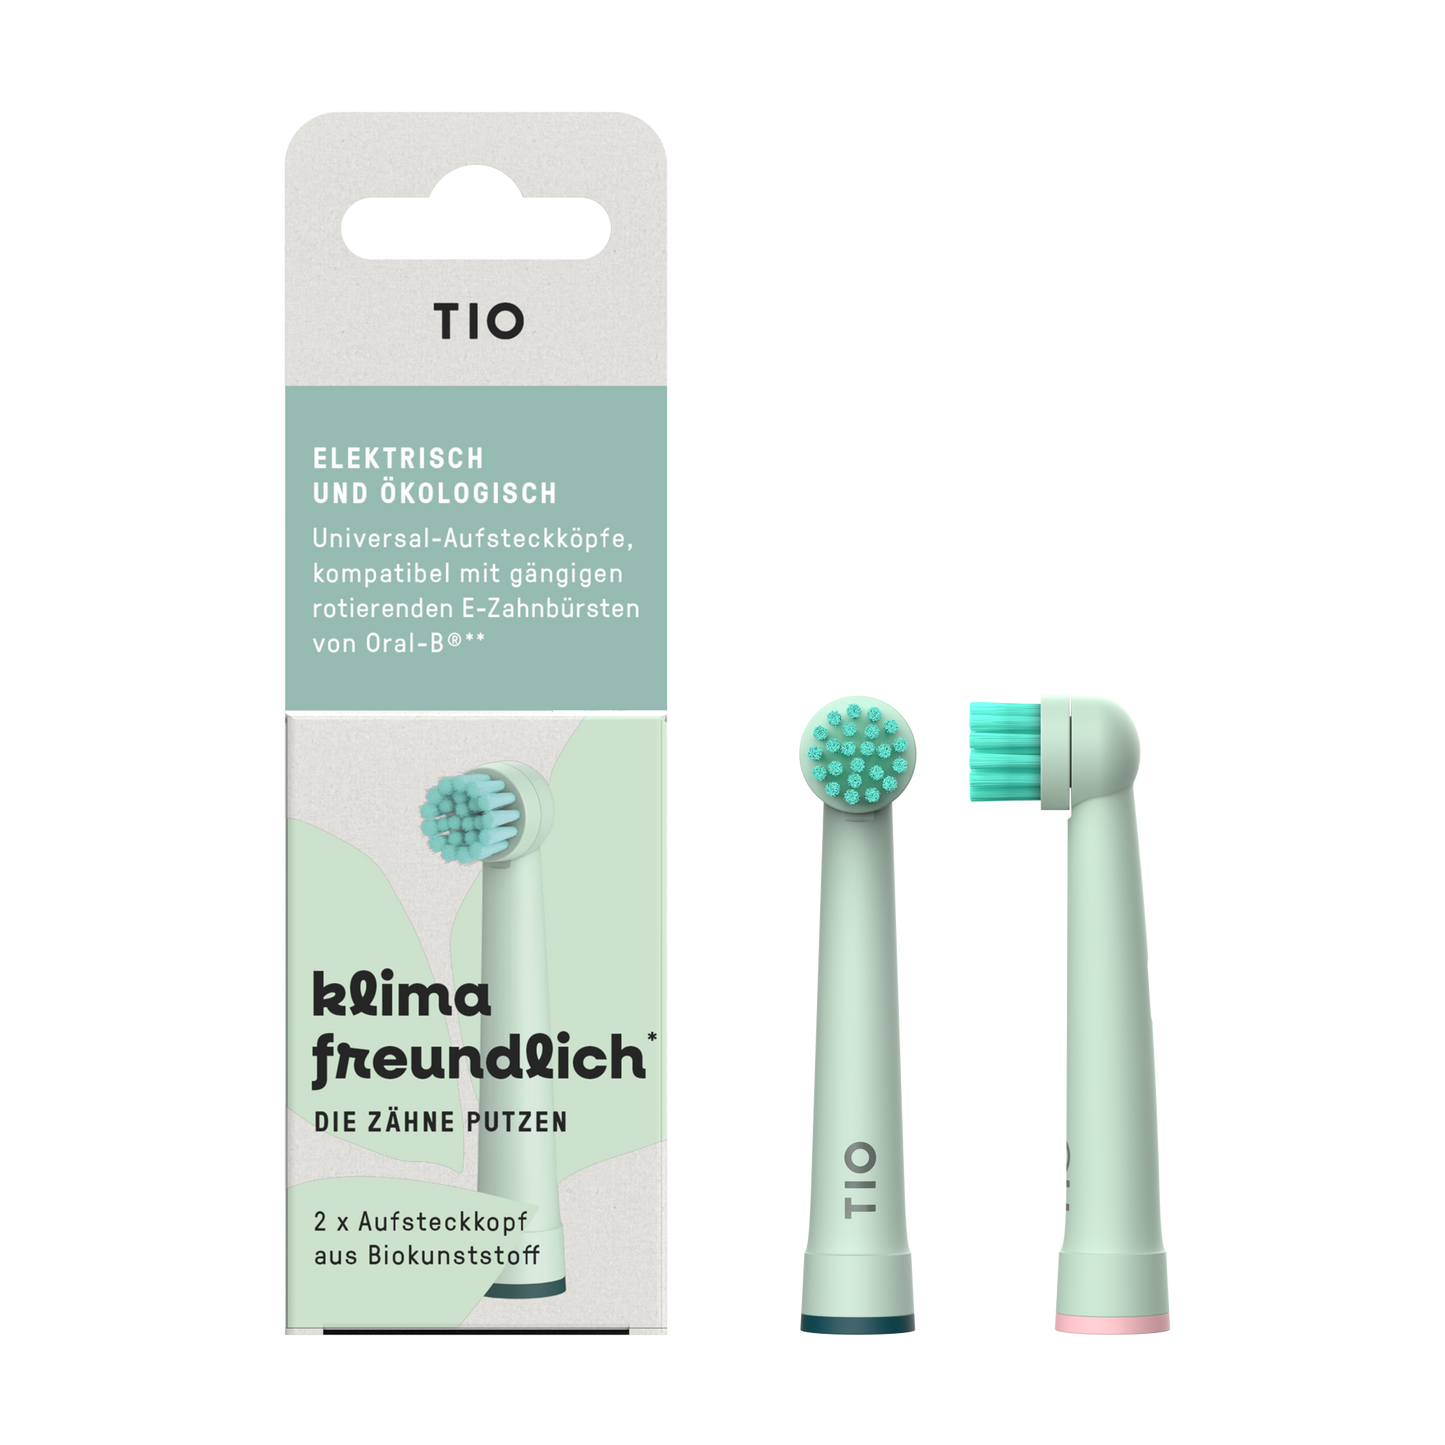 Tiomatik Replacement Heads For Braun and Oral B Electric Toothbrushes